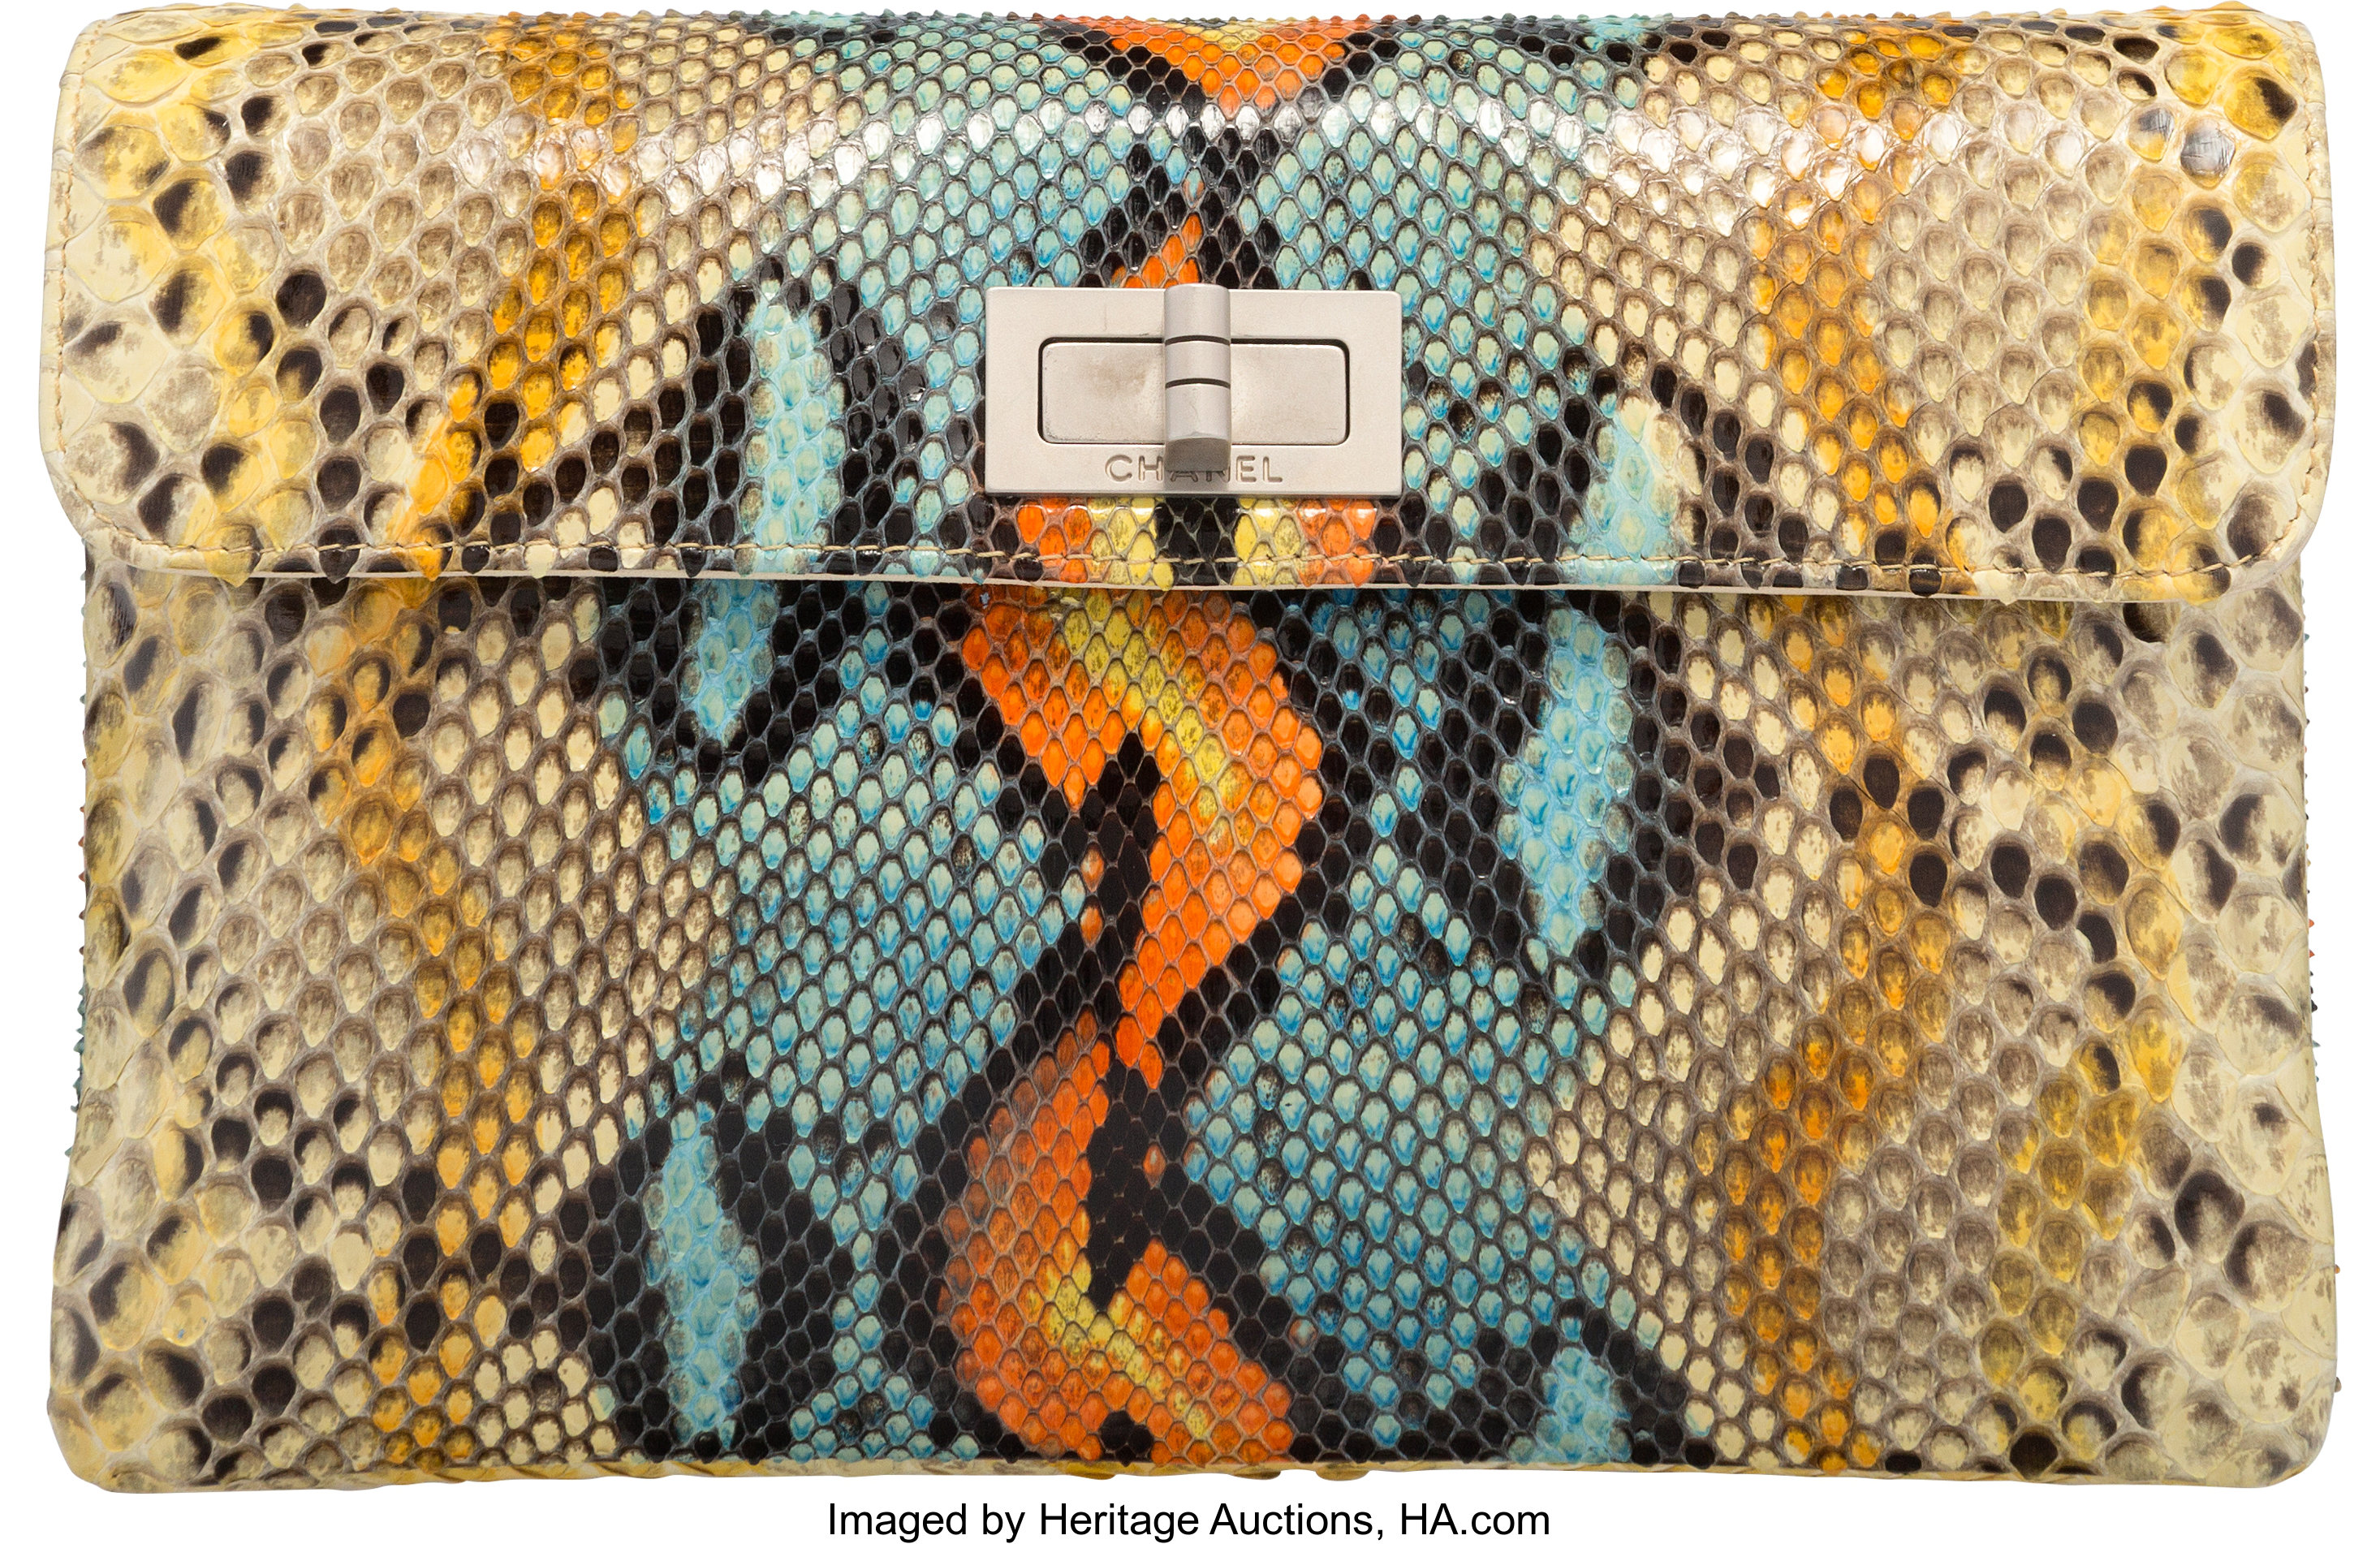 Chanel Multicolor Python Flap Clutch Bag. Very Good Condition. 8.5